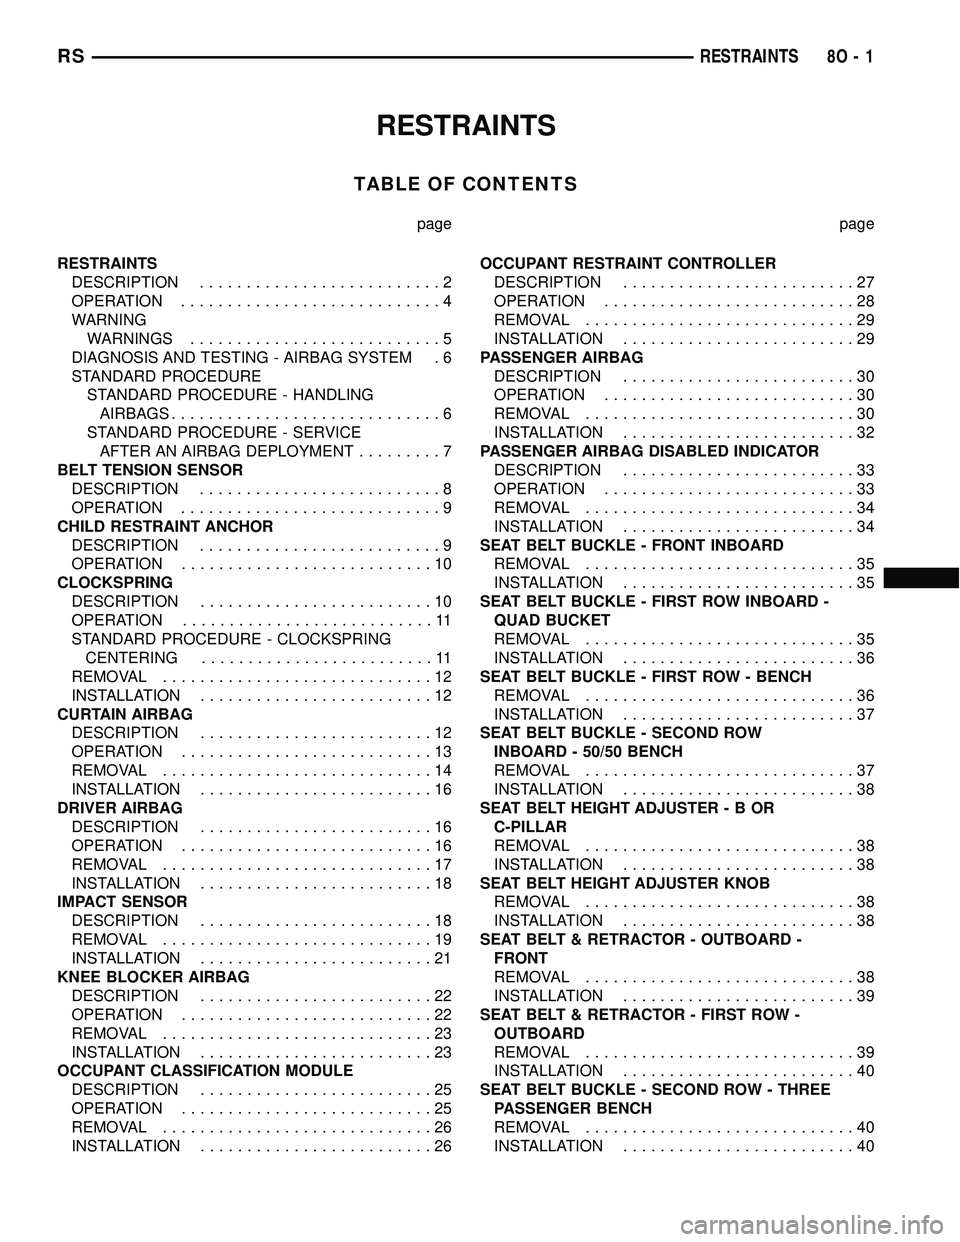 CHRYSLER VOYAGER 2005  Service Manual RESTRAINTS
TABLE OF CONTENTS
page page
RESTRAINTS
DESCRIPTION..........................2
OPERATION............................4
WARNING
WARNINGS...........................5
DIAGNOSIS AND TESTING - AIR